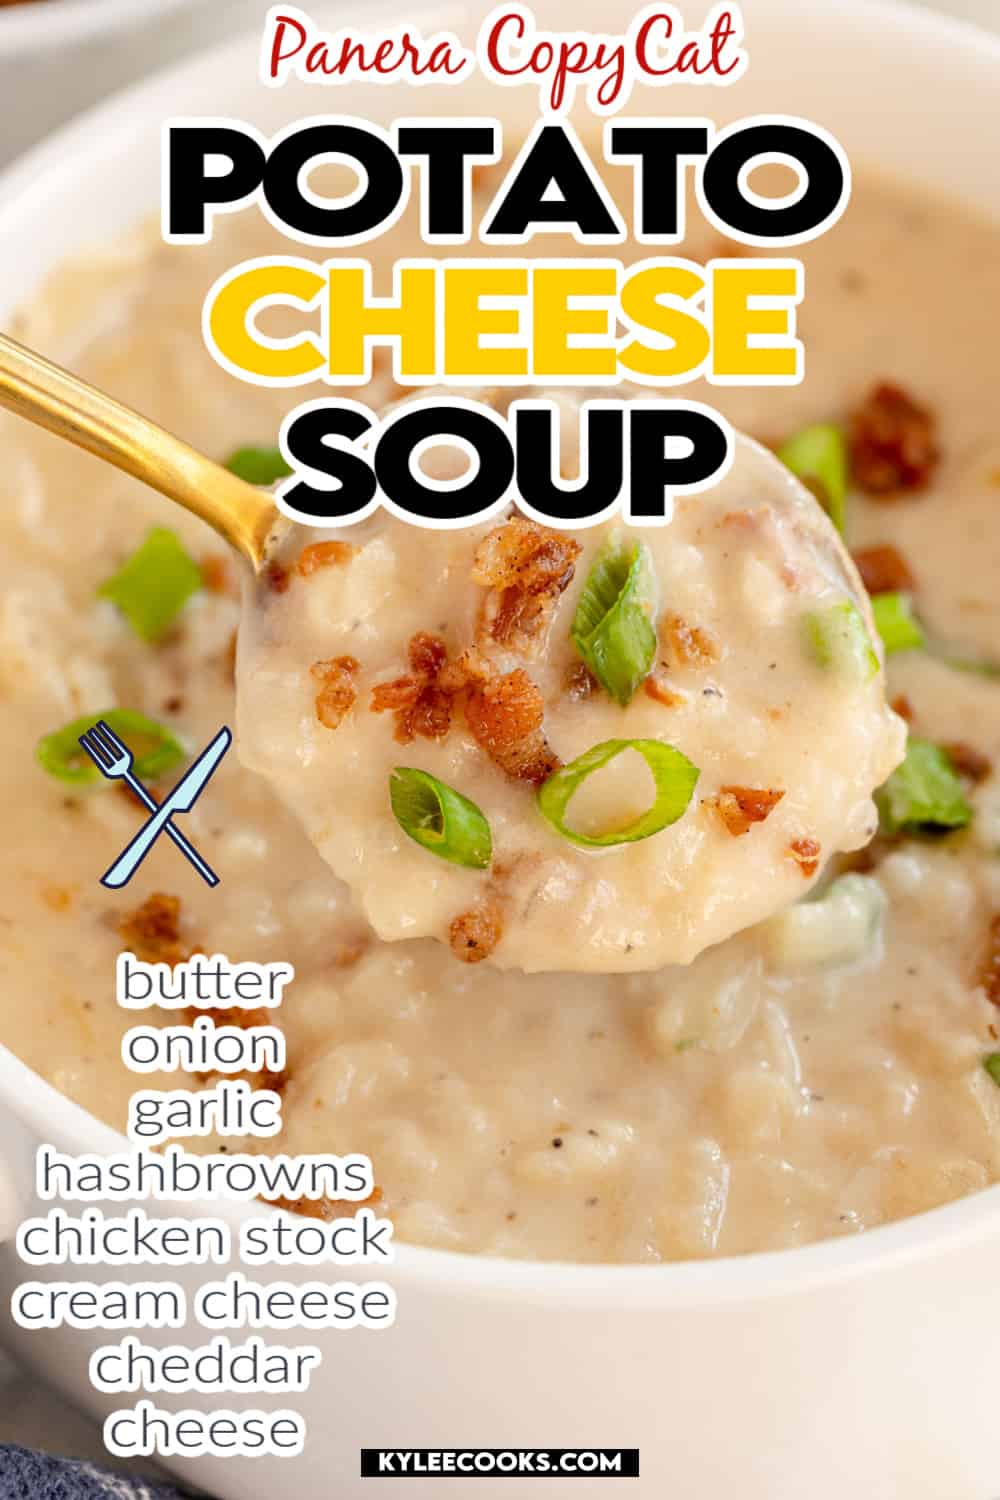 Potato Cheese Soup on a ladle with recipe name and ingredients overlaid in text and images.